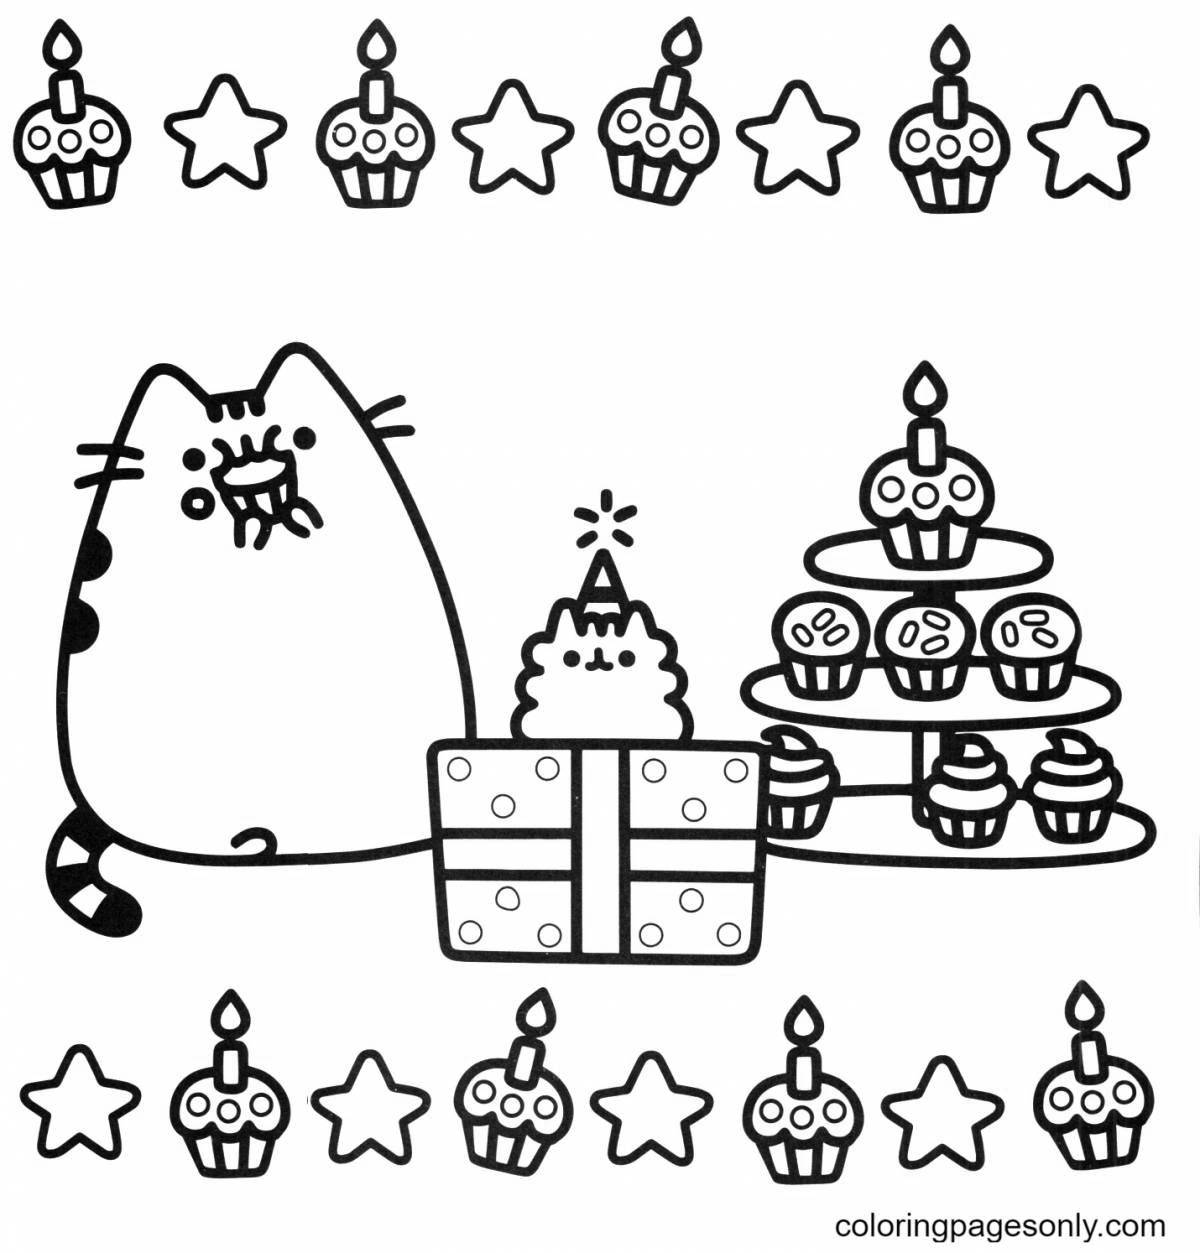 Exciting Pusheen Christmas coloring book